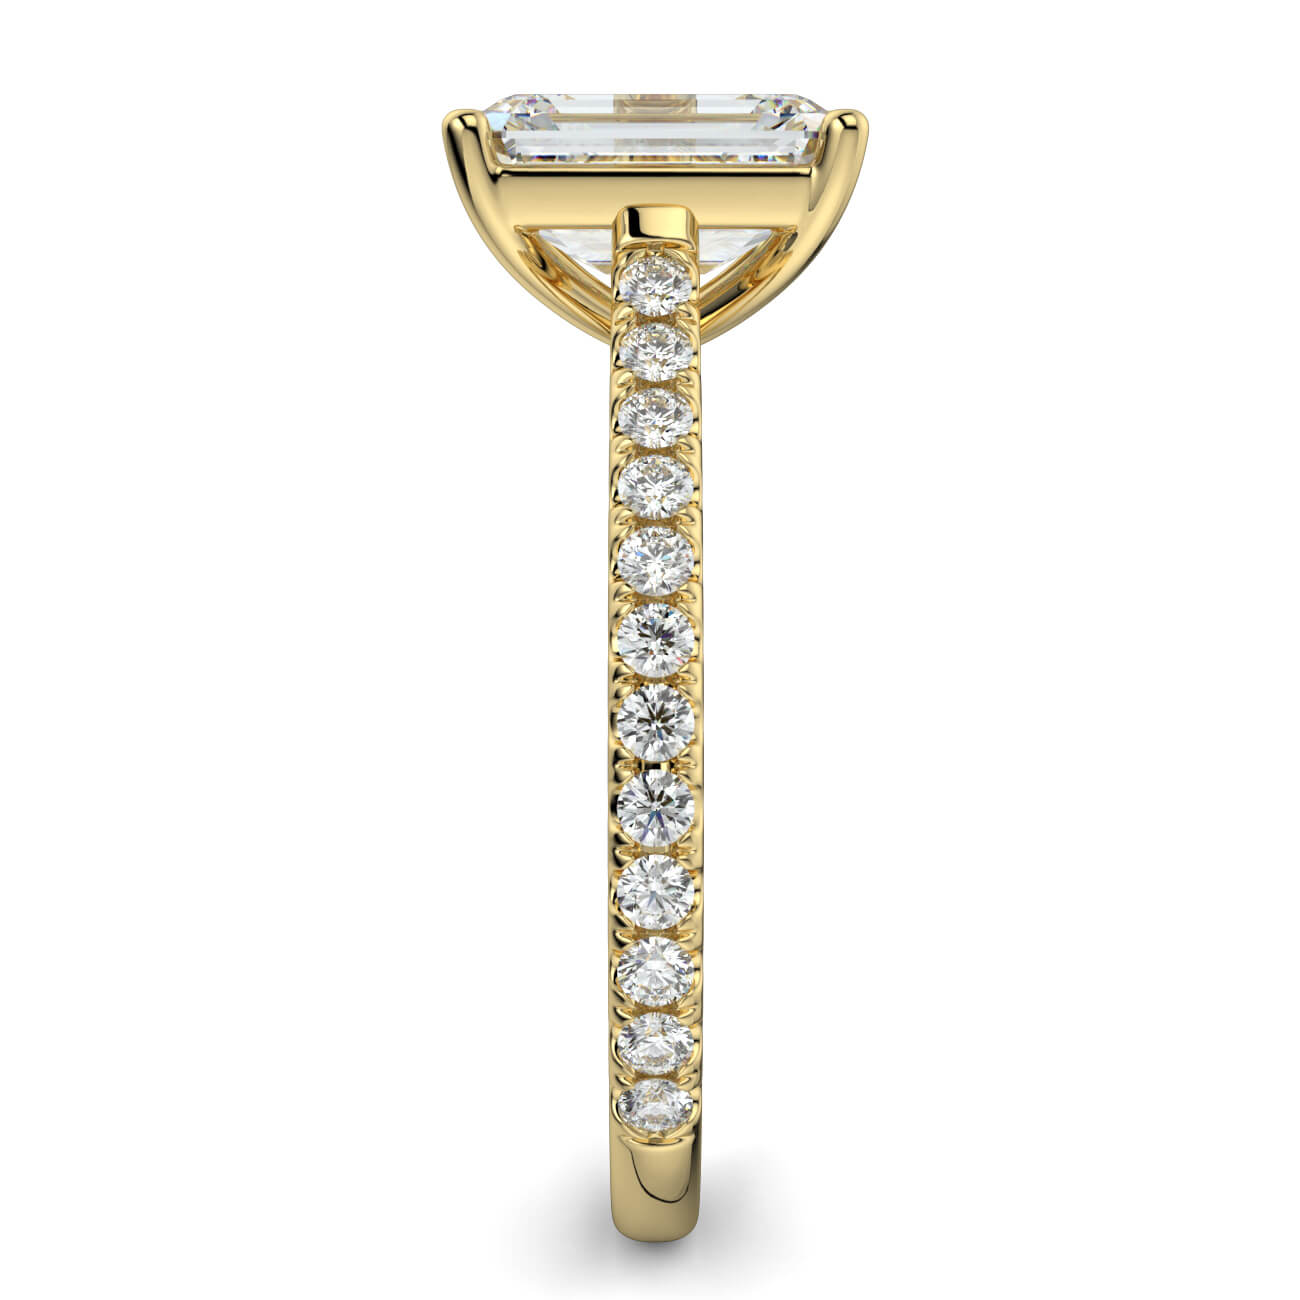 Emerald Cut diamond cathedral engagement ring in yellow gold – Australian Diamond Network